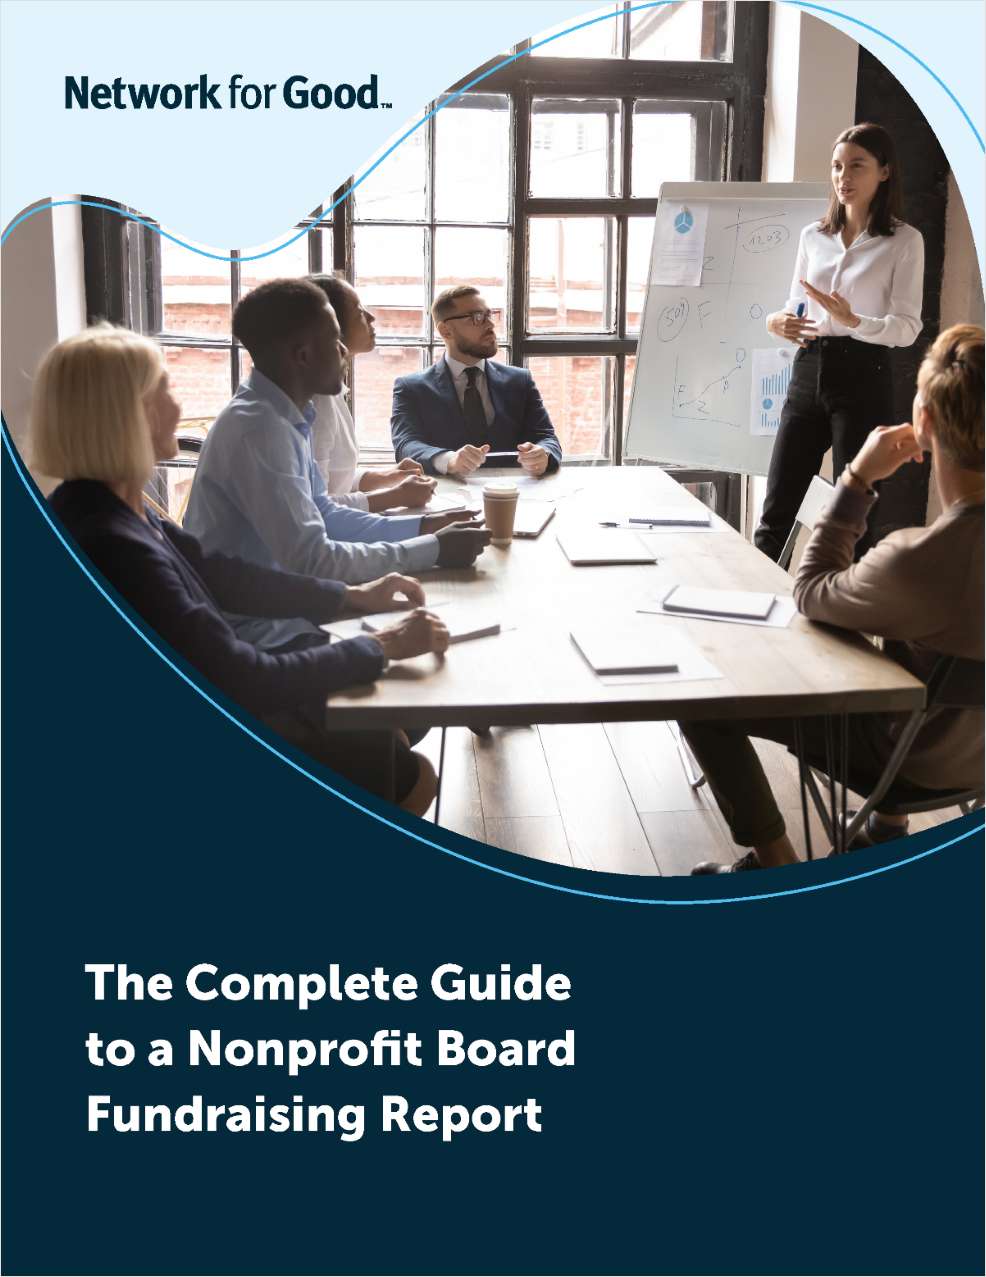 Creating an Engaging Fundraising Report for Your Board